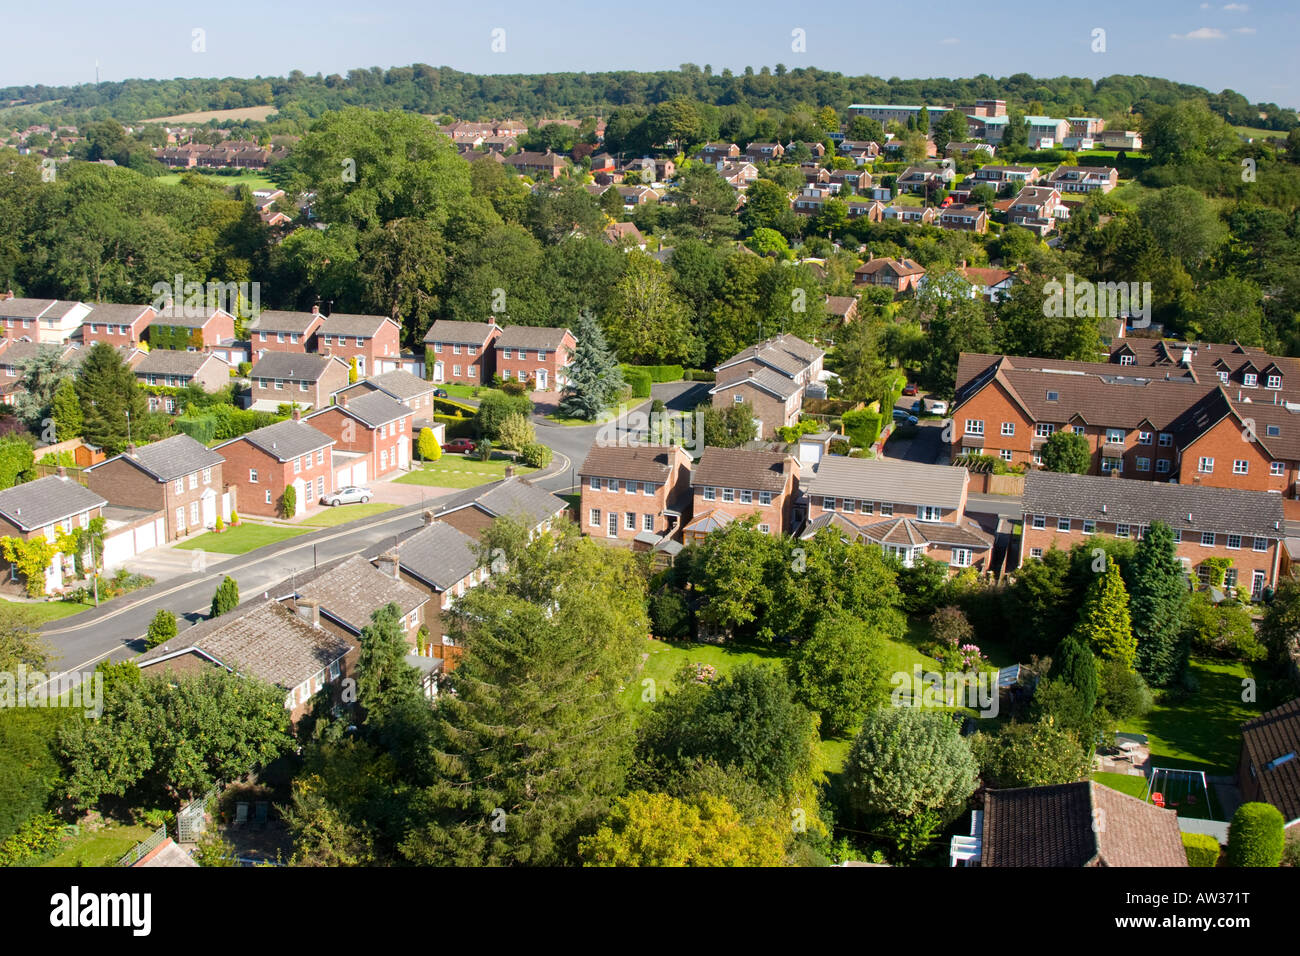 Aerial view across a residential housing estate in Marlborough St John s school in the background Stock Photo